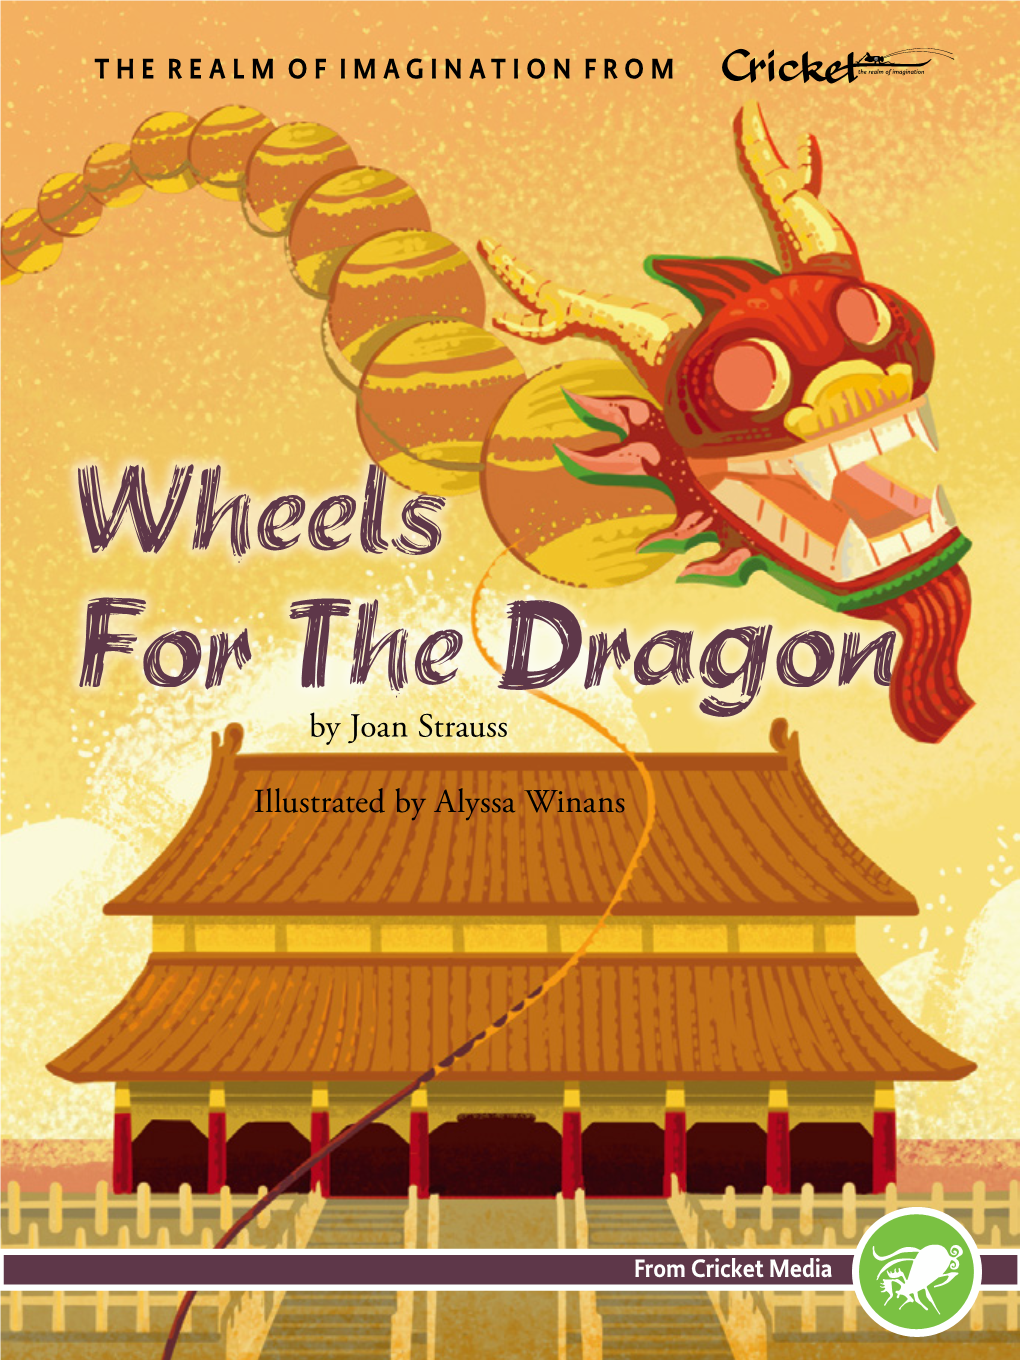 Wheels for the Dragon by Joan Strauss